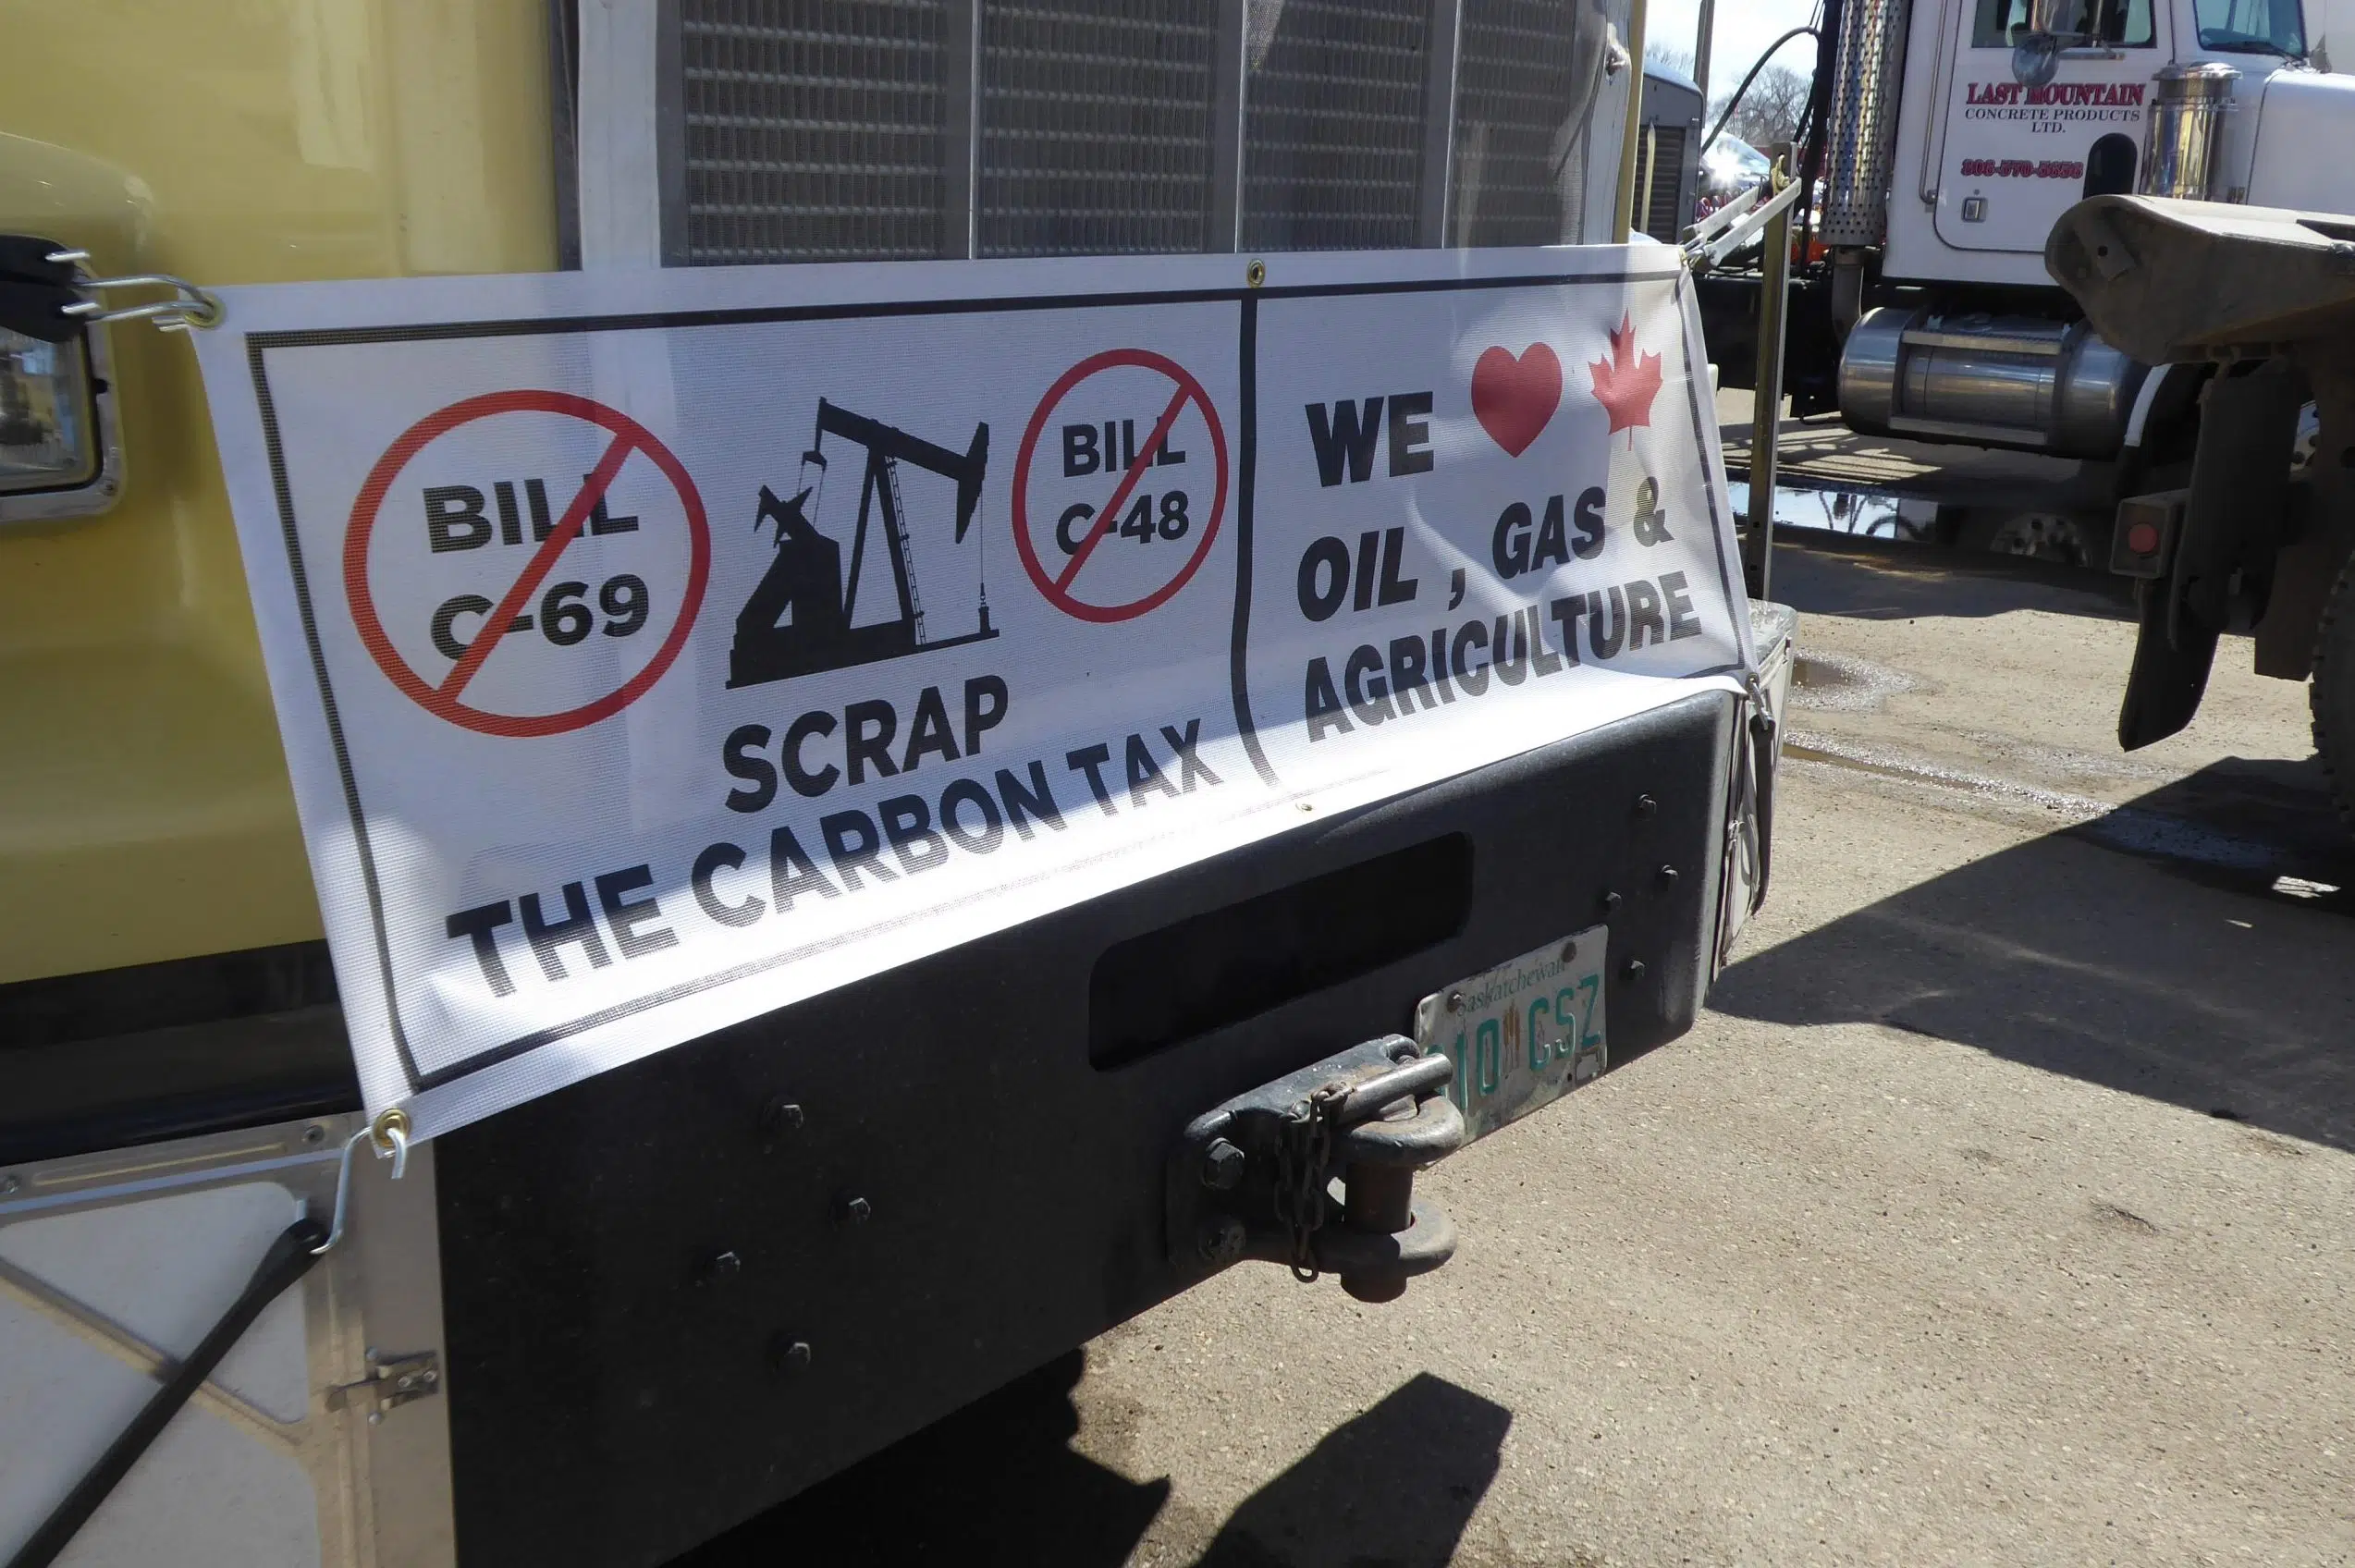 Carbon tax protest in Regina features convoy, rally